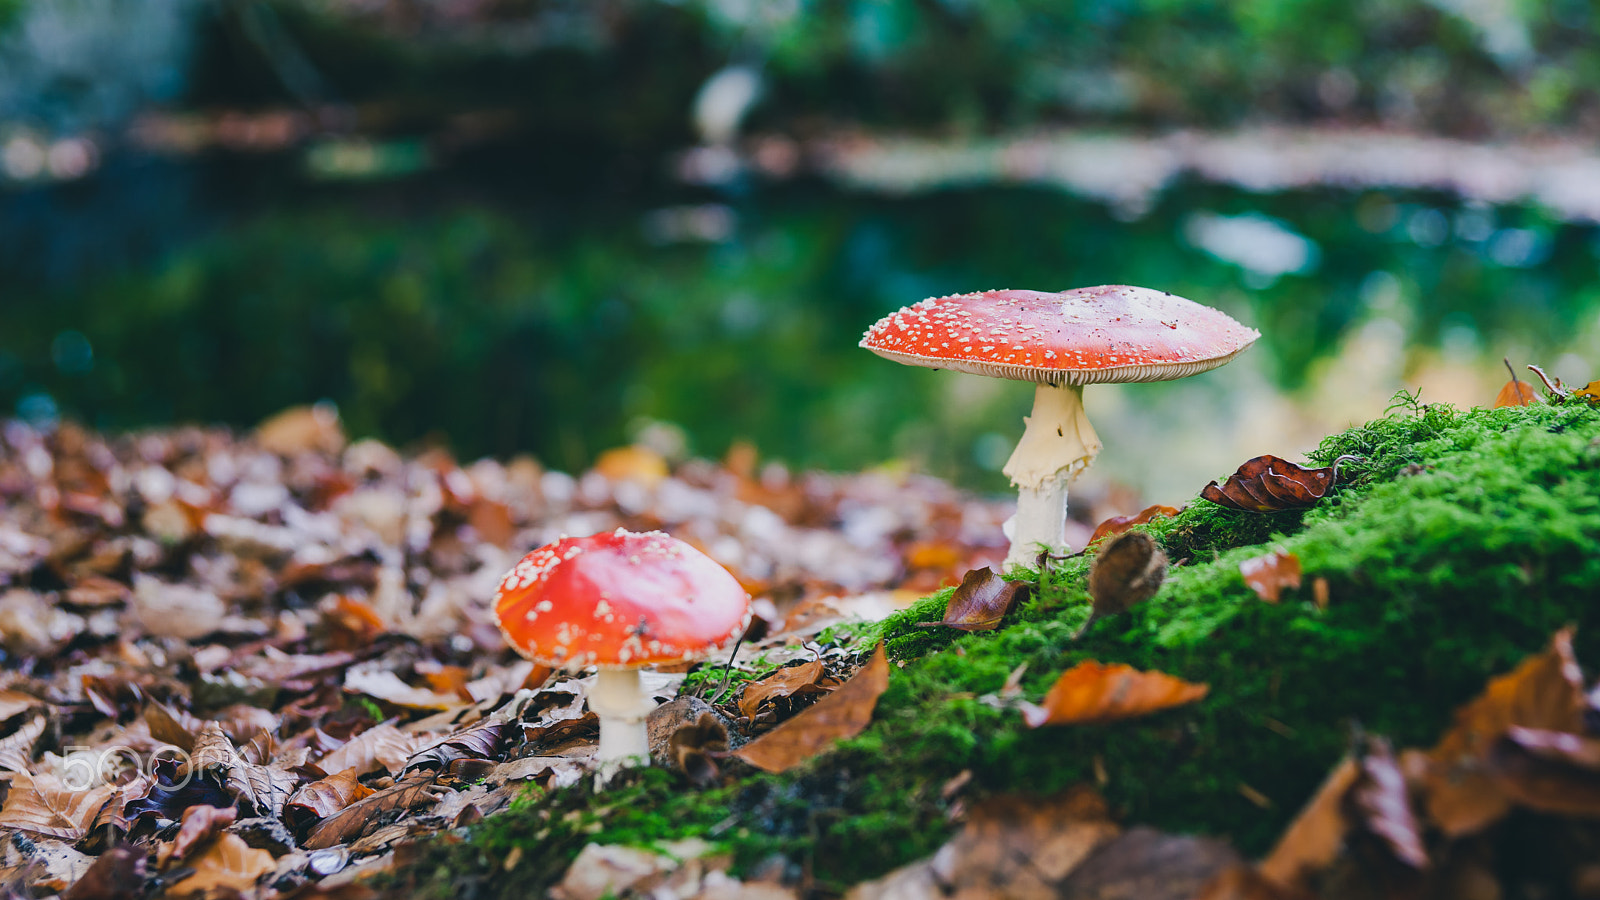 Sony Alpha DSLR-A900 sample photo. The red and white poisonous toadstool or mushroom called amanita photography